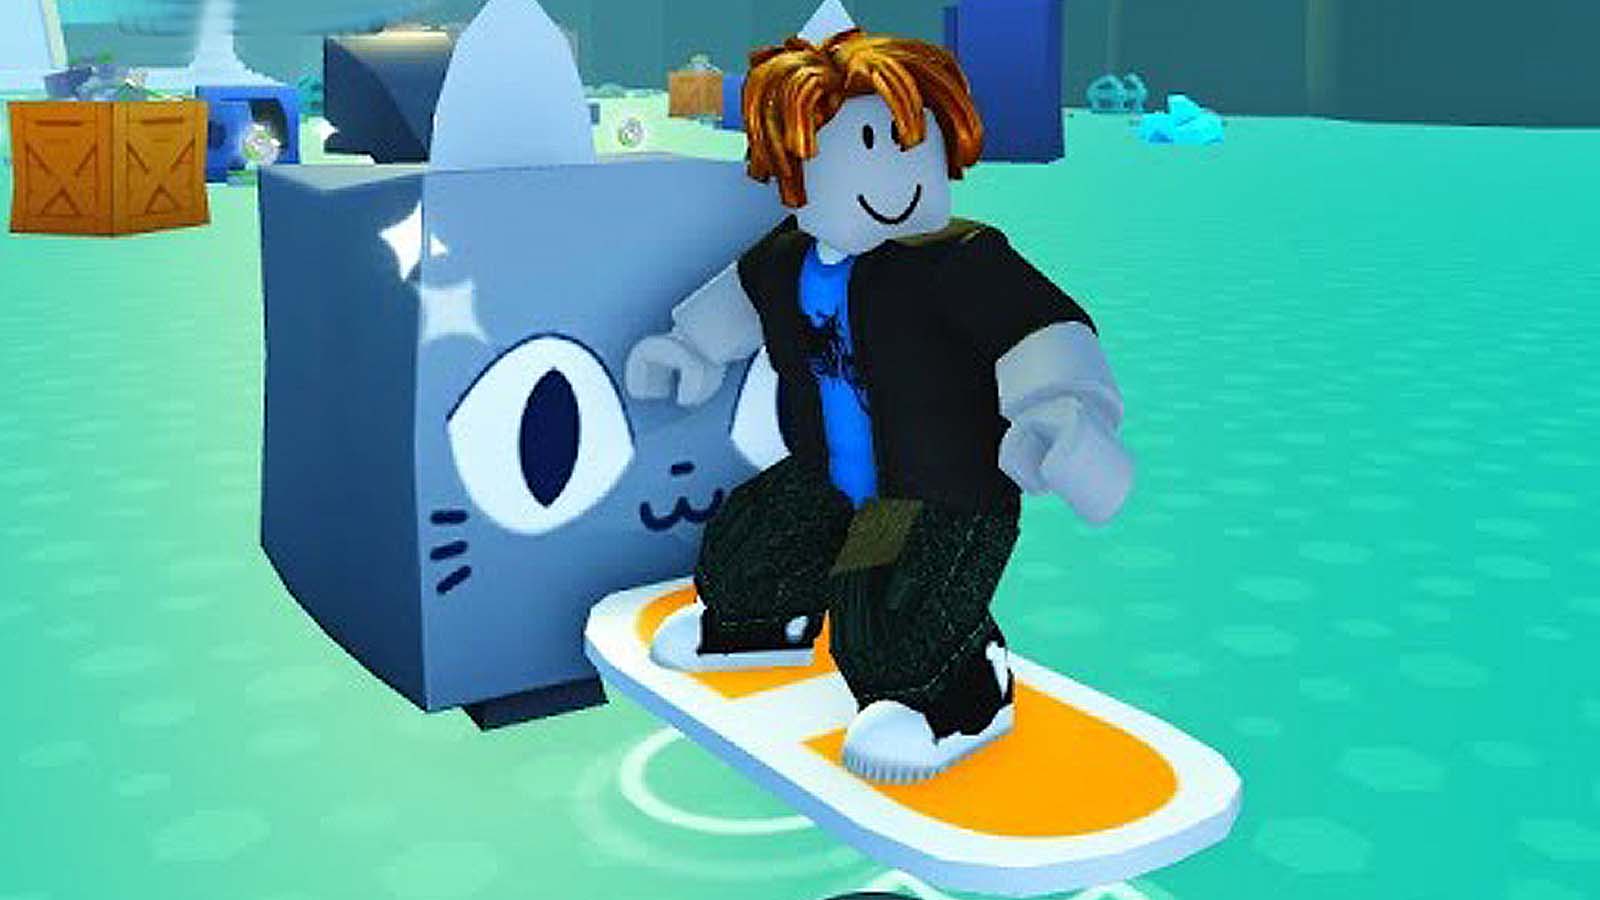 new-exclusive-codes-in-pet-simulator-roblox-gamedreamer